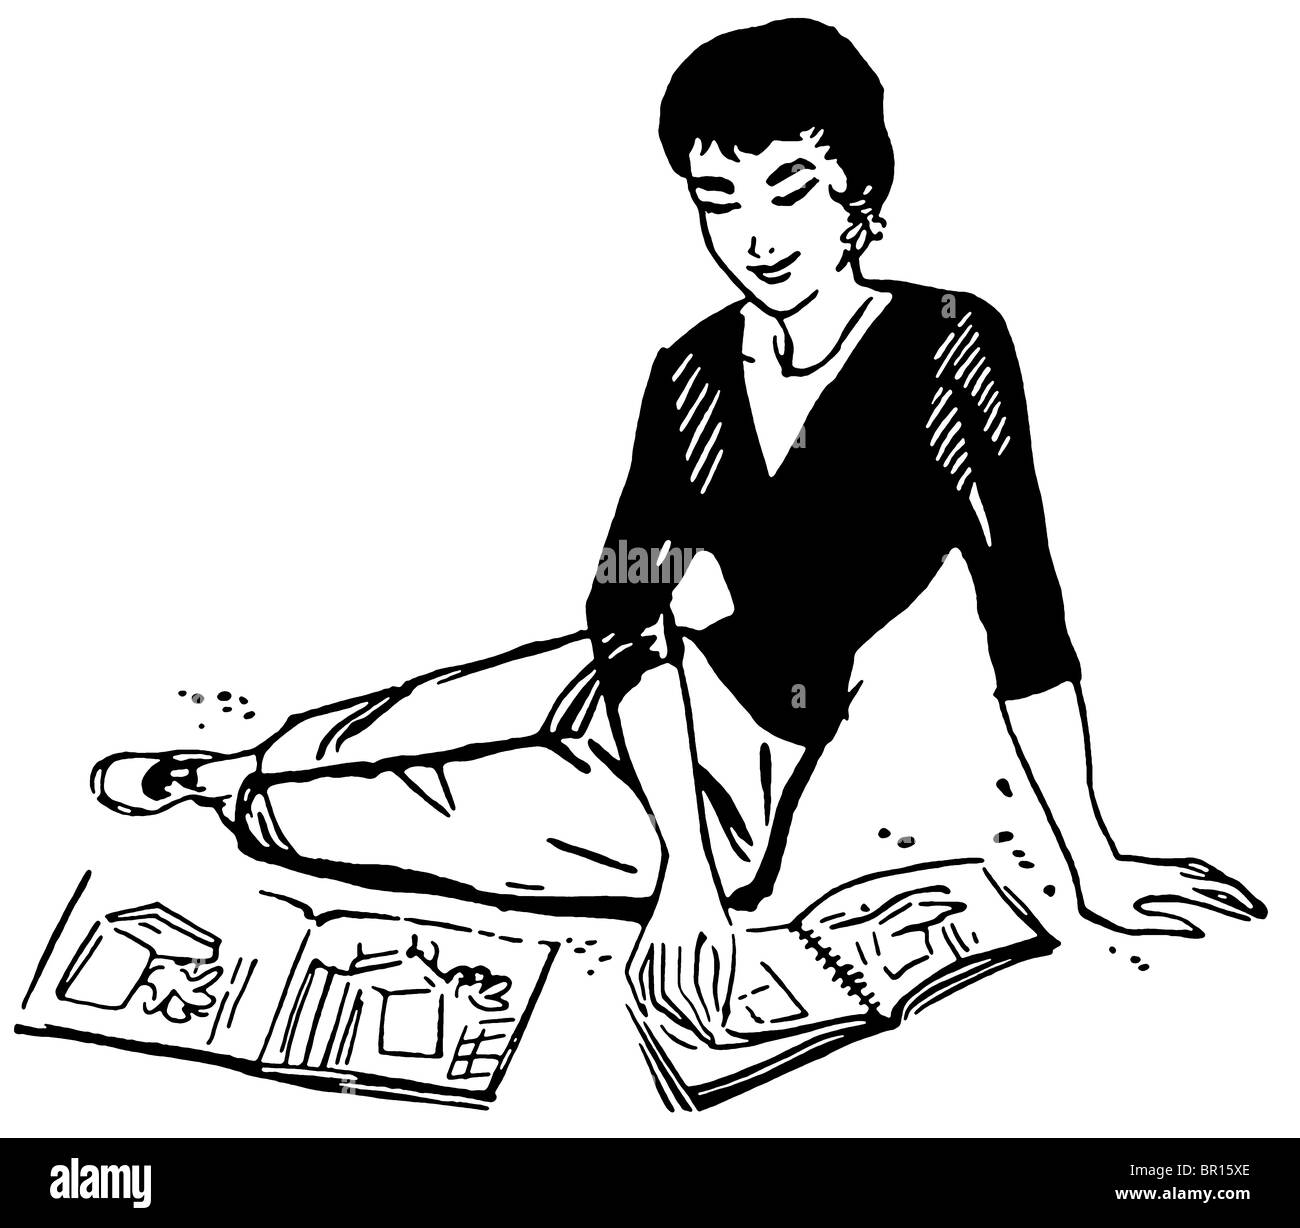 A black and white version of a vintage image of a woman flicking through magazines Stock Photo